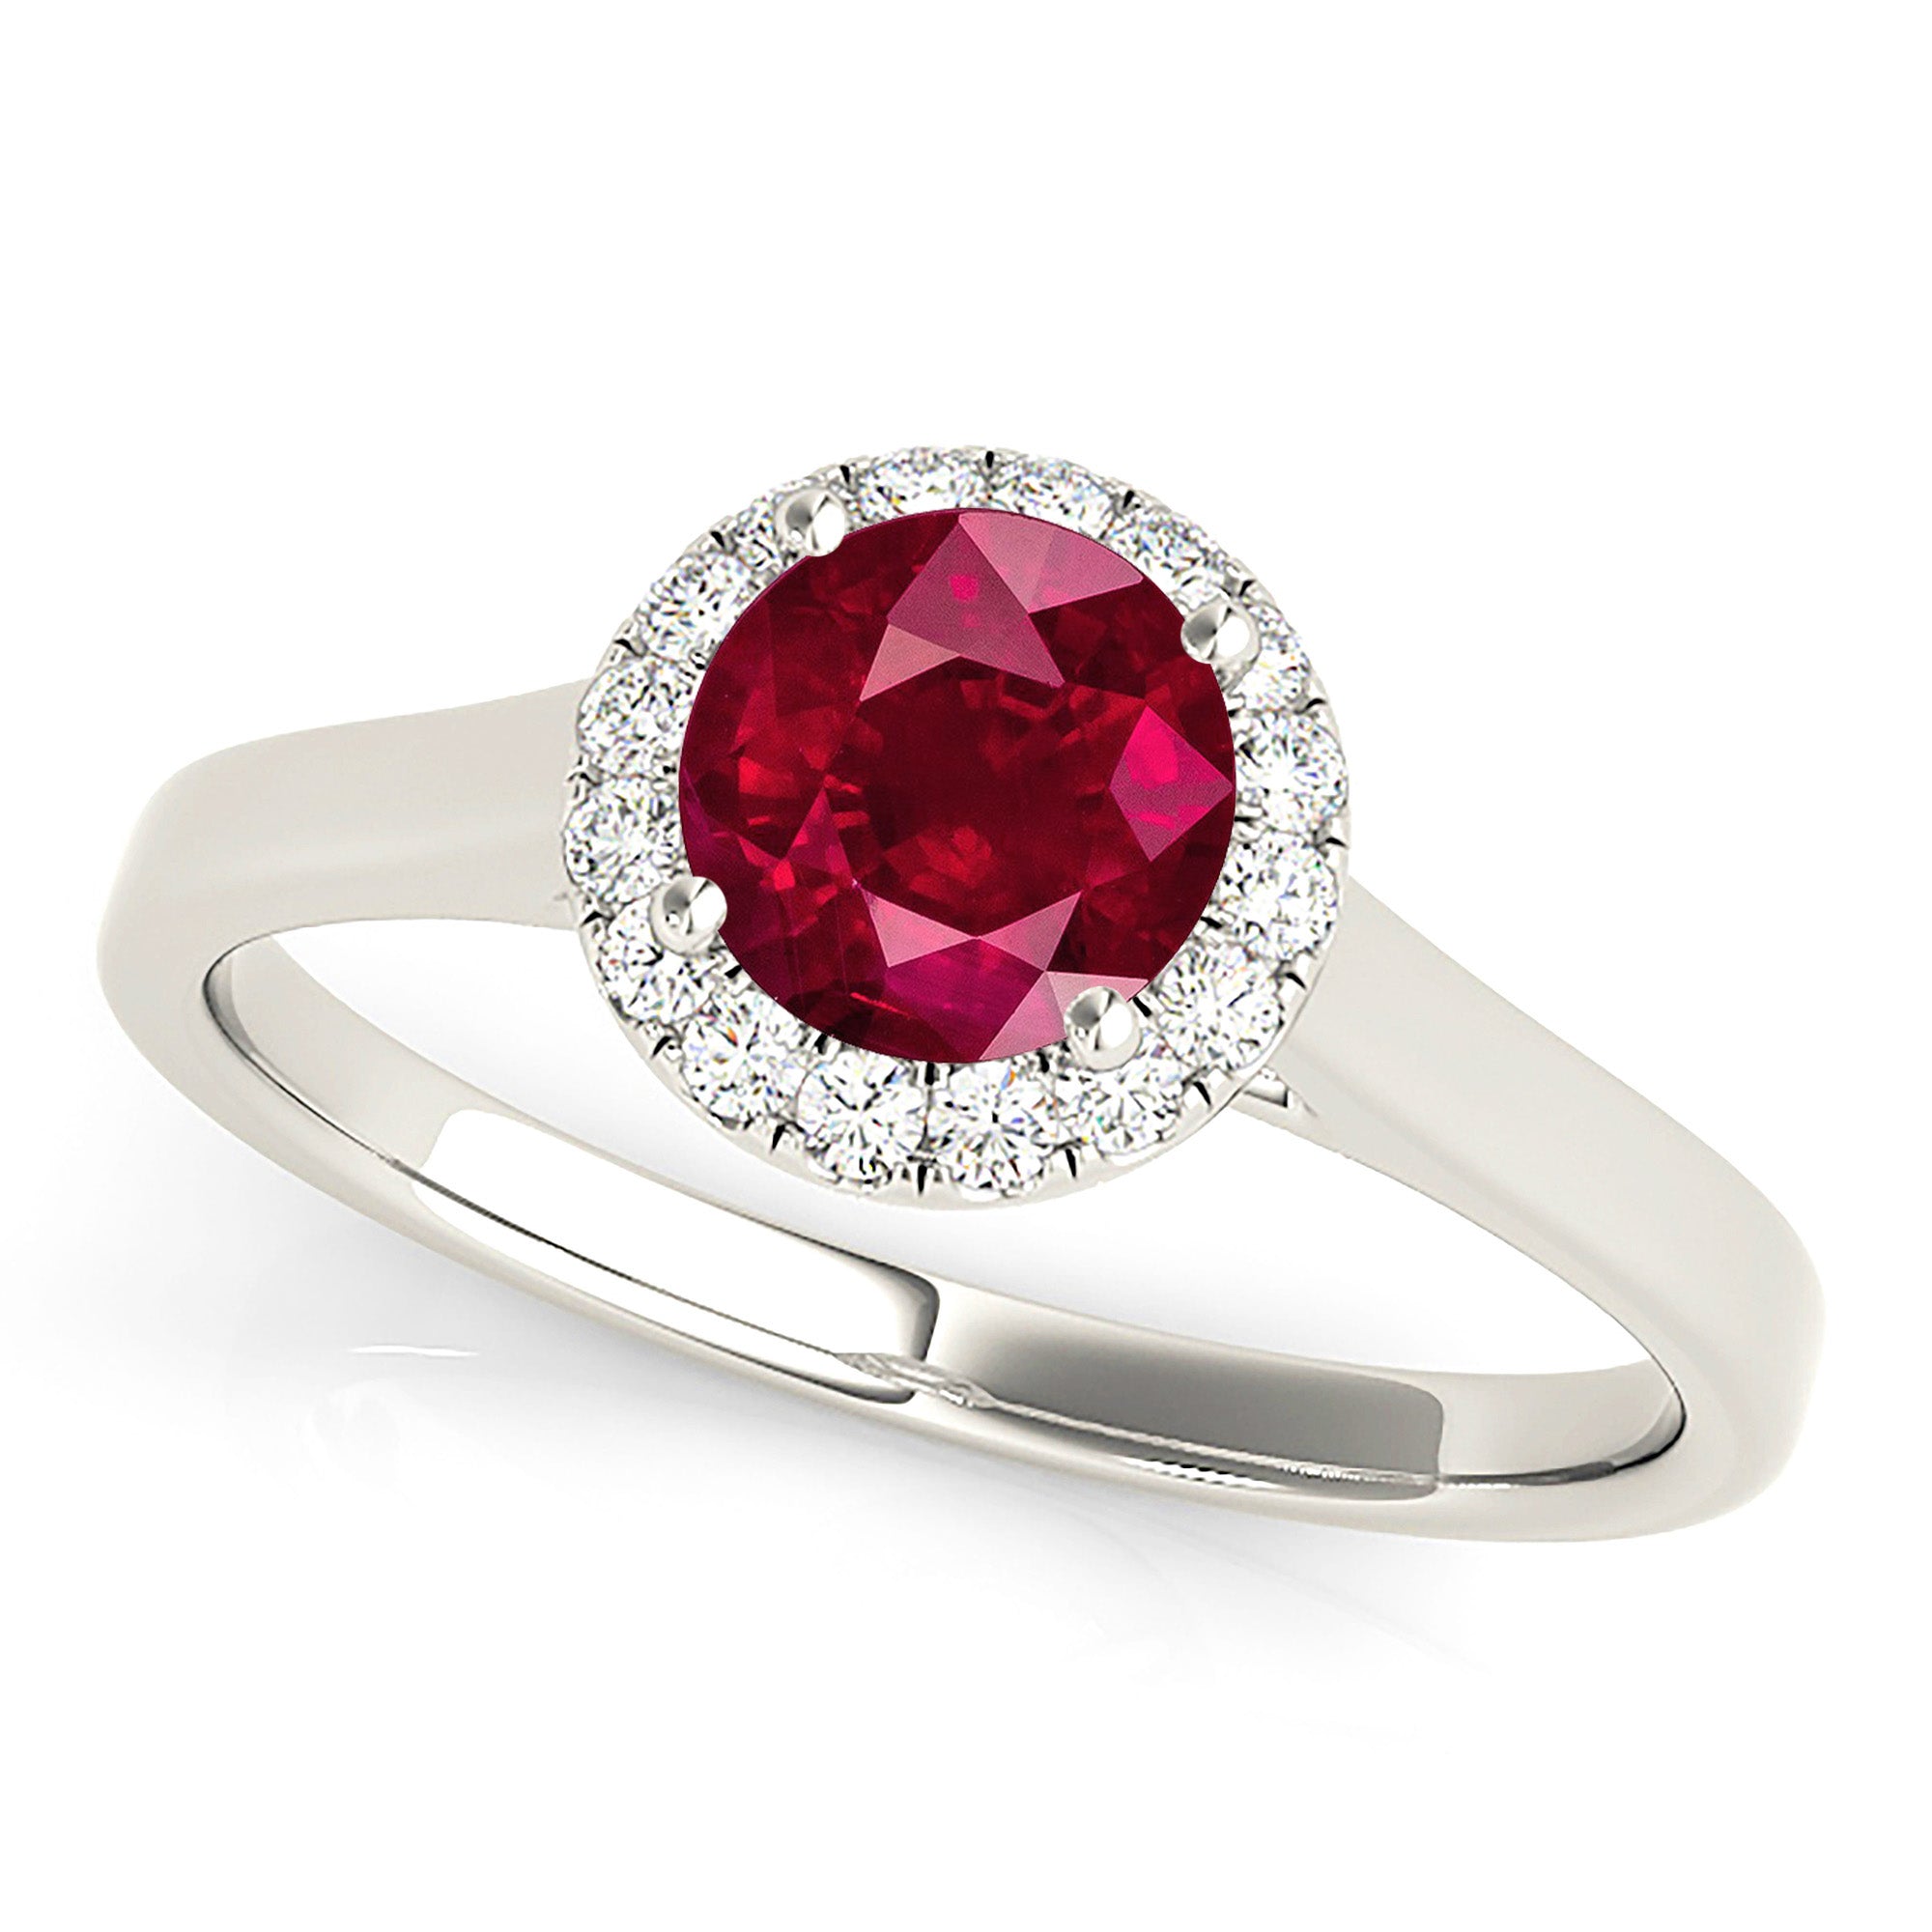 1.35 ct. Genuine Ruby Ring With 0.10 ctw. Diamond Thin, Wide Solid Gold Band, Elegant Halo Setting| Round Ruby Halo Ring | Natural Ruby Ring-in 14K/18K White, Yellow, Rose Gold and Platinum - Christmas Jewelry Gift -VIRABYANI